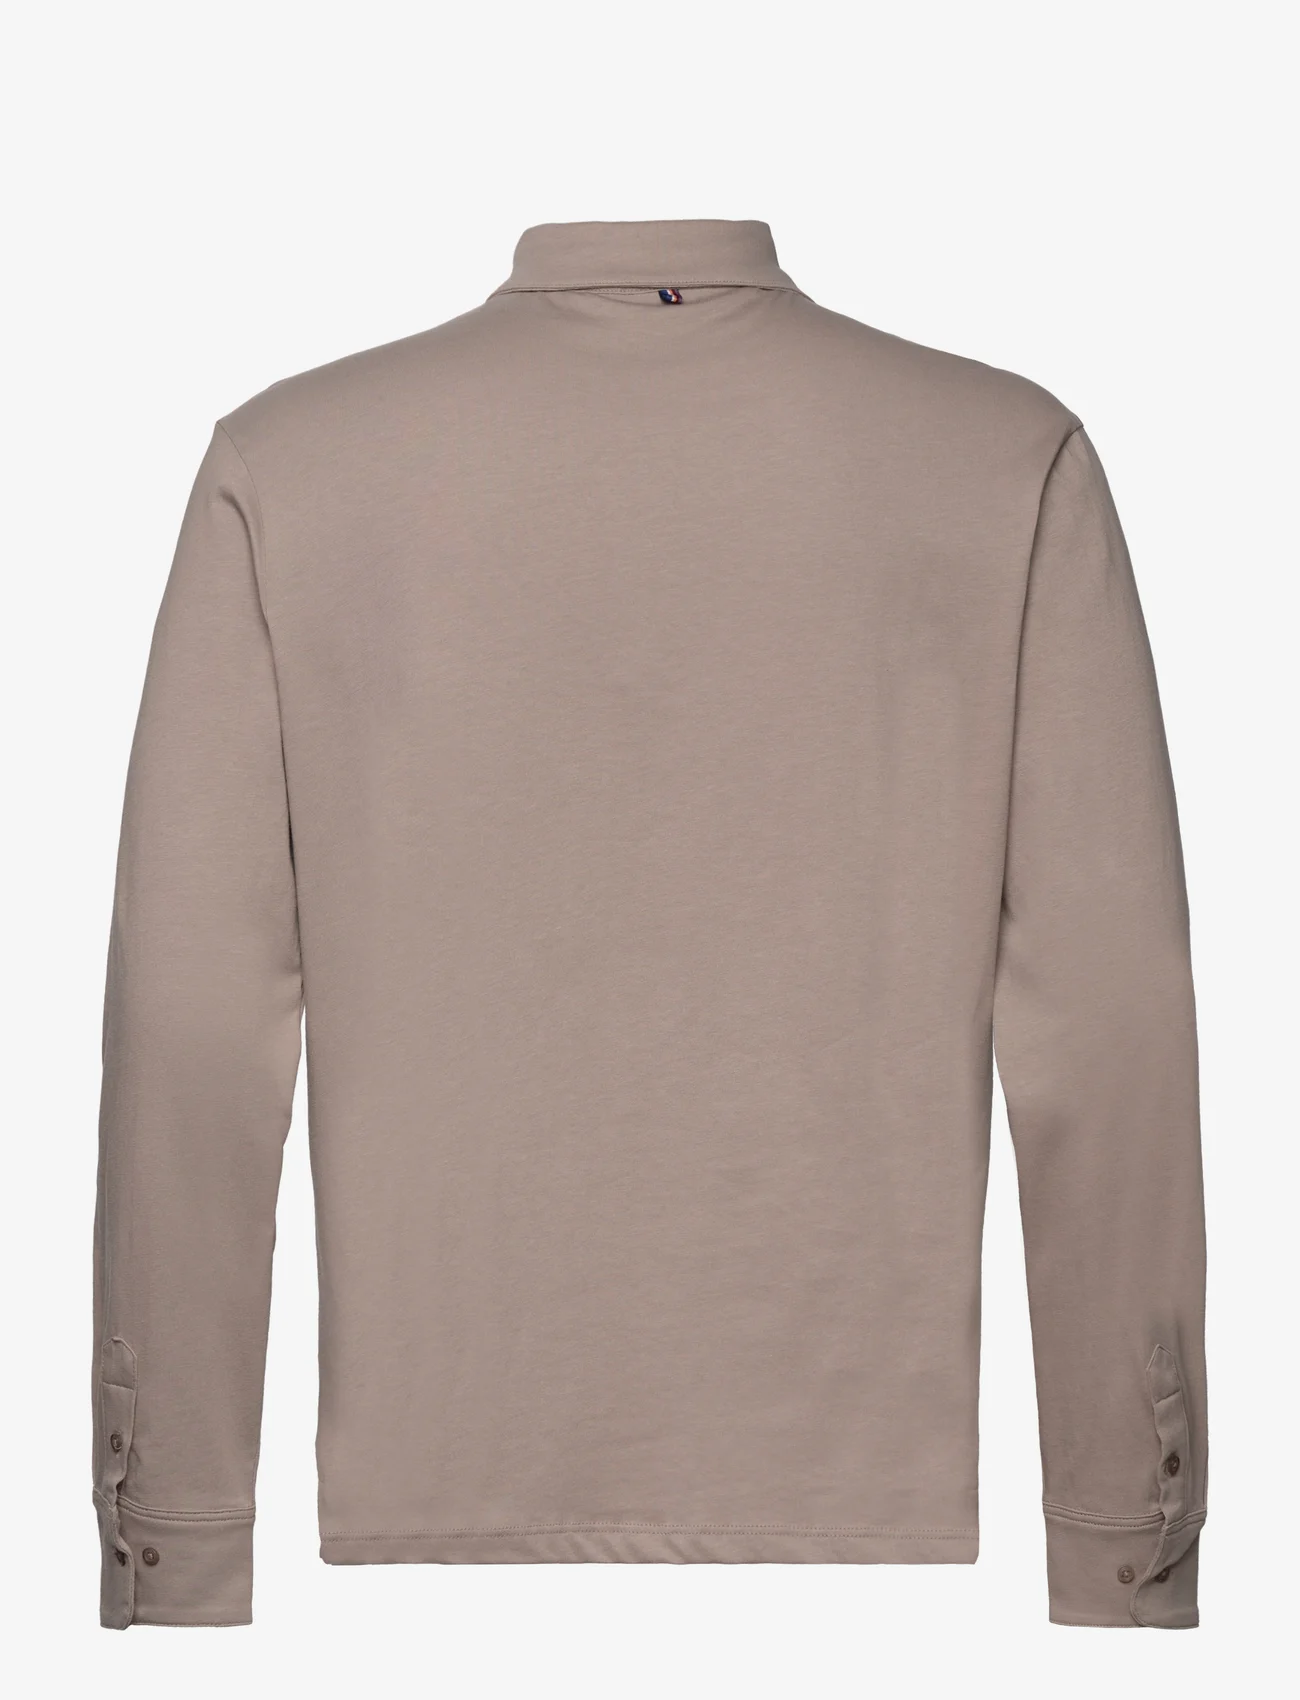 SNOOT - FIERE LS SHIRT M - long-sleeved polos - mole - 1